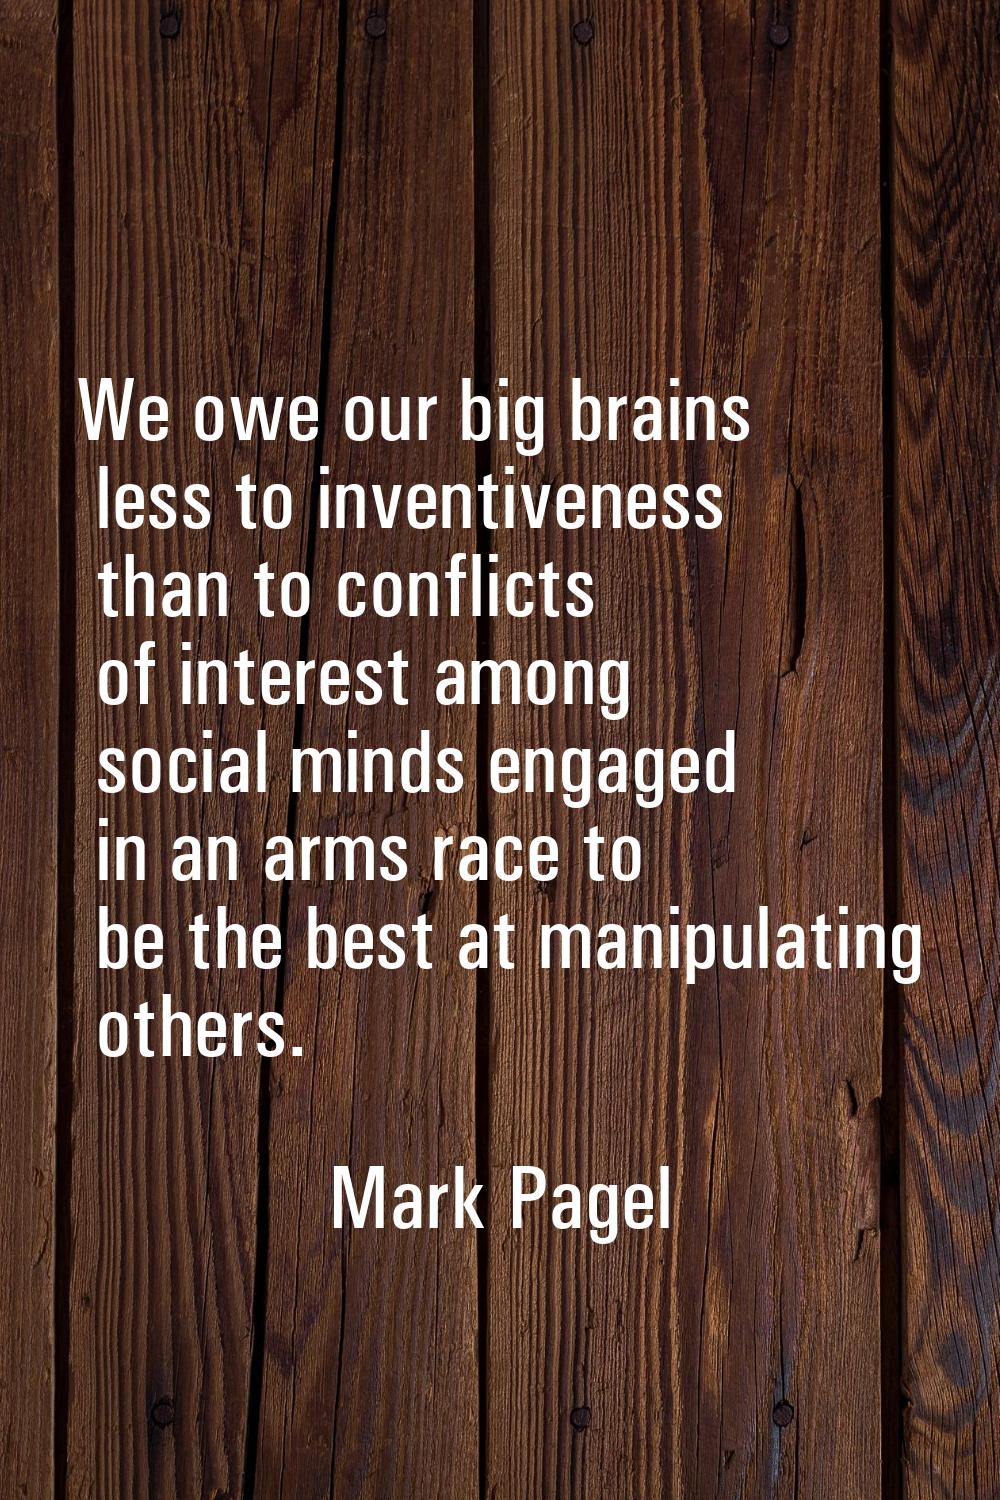 We owe our big brains less to inventiveness than to conflicts of interest among social minds engage